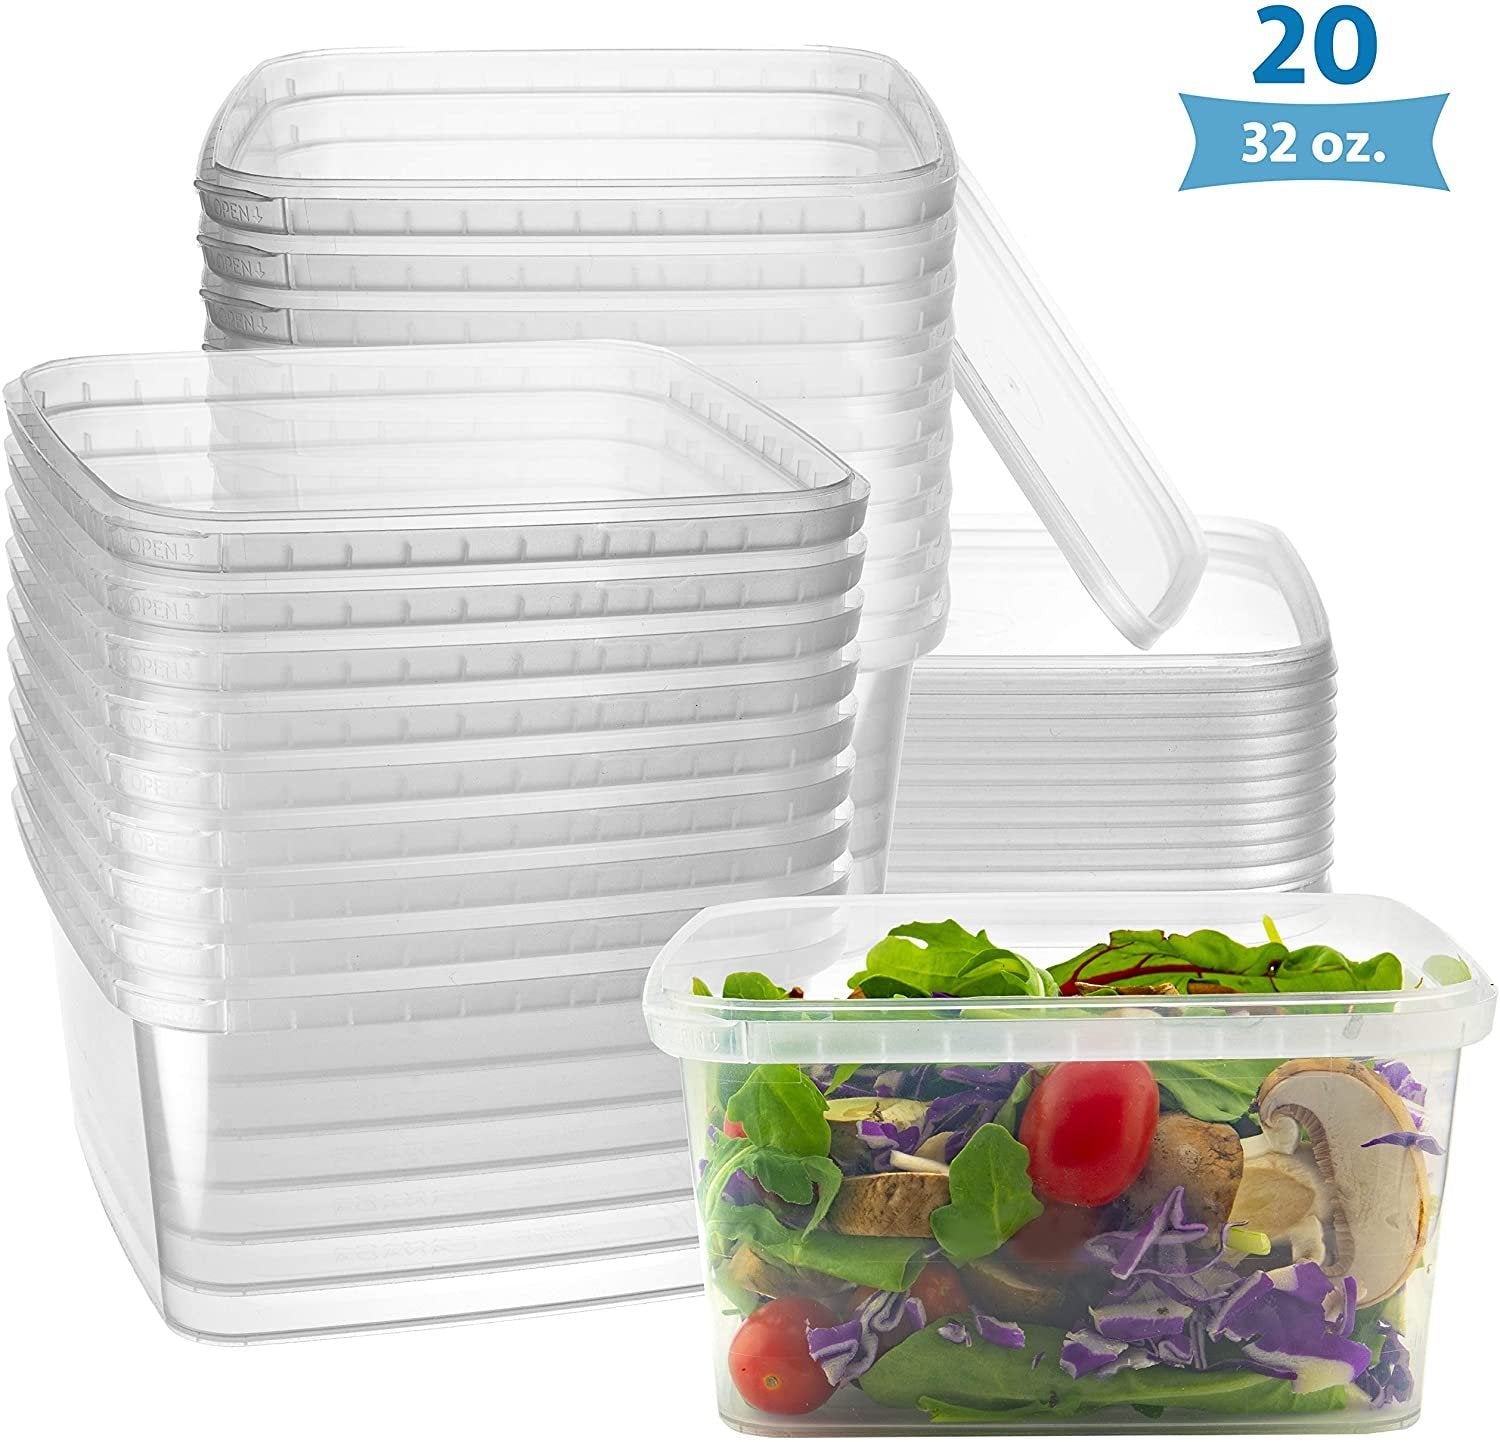 32 oz Deli Containers with Lids 240 Bulk Pack – Plastic Quart Container with Lid Disposable 32oz Freezer Soup & Food Storage Tall Large Container 32